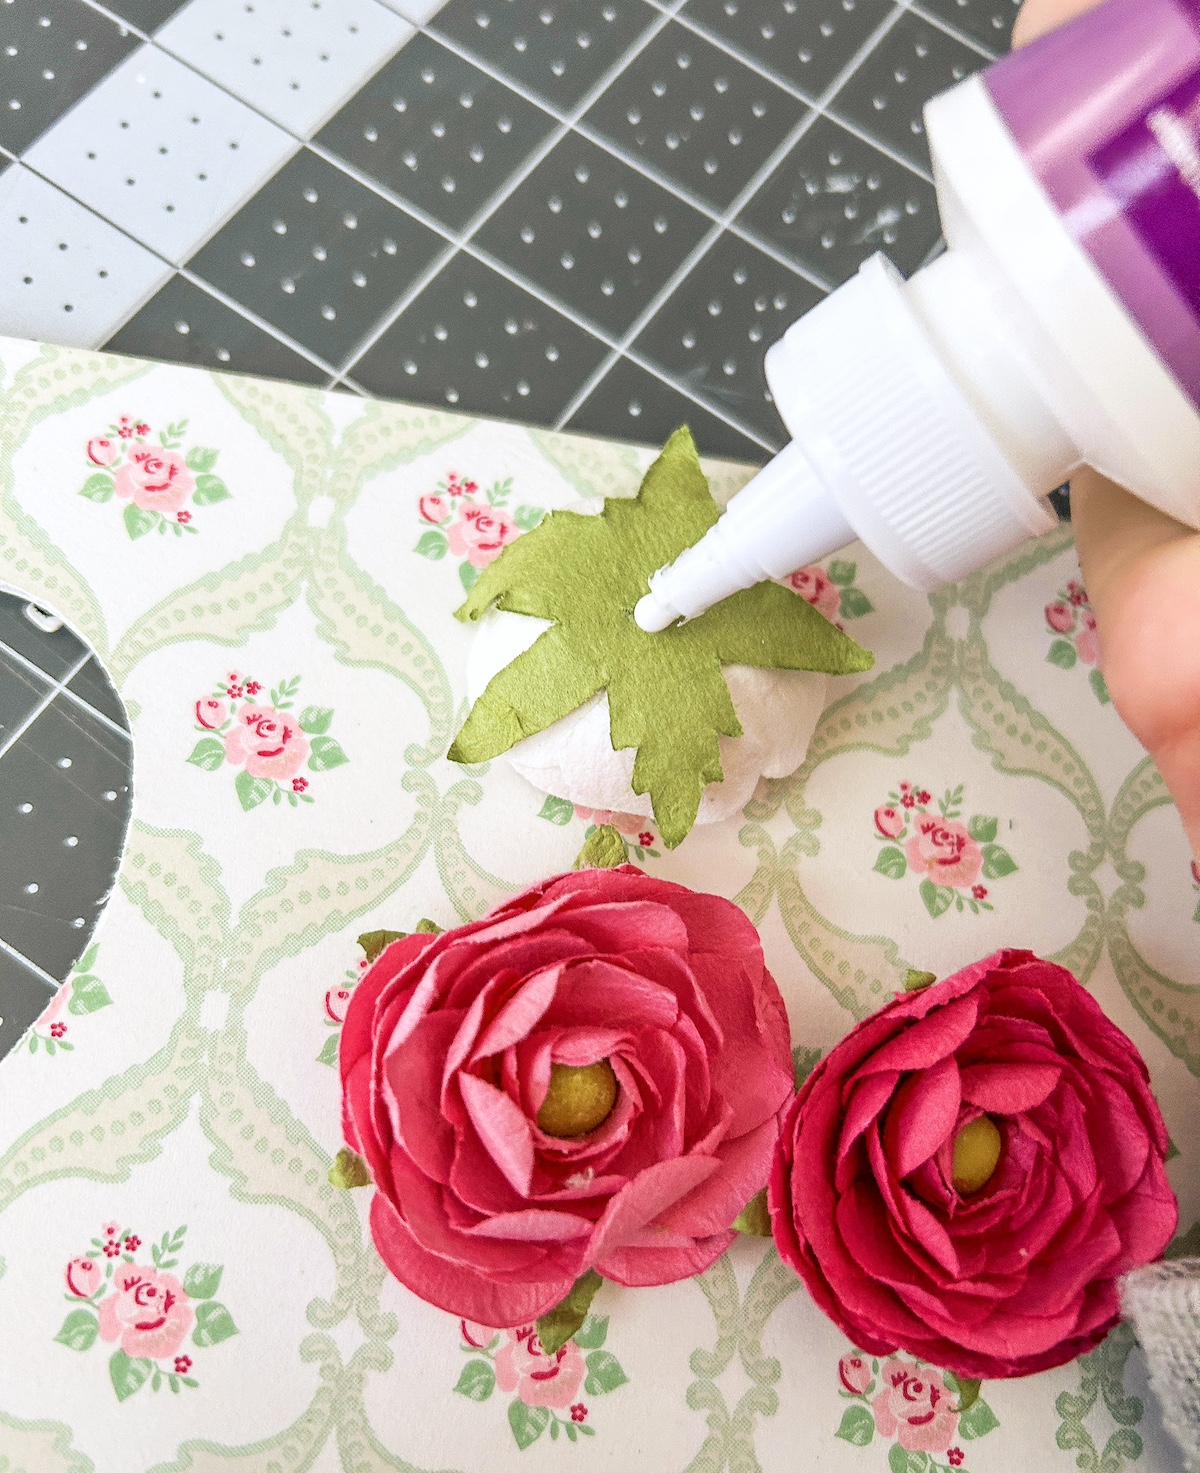 Gluing the paper flowers onto the frame with craft glue